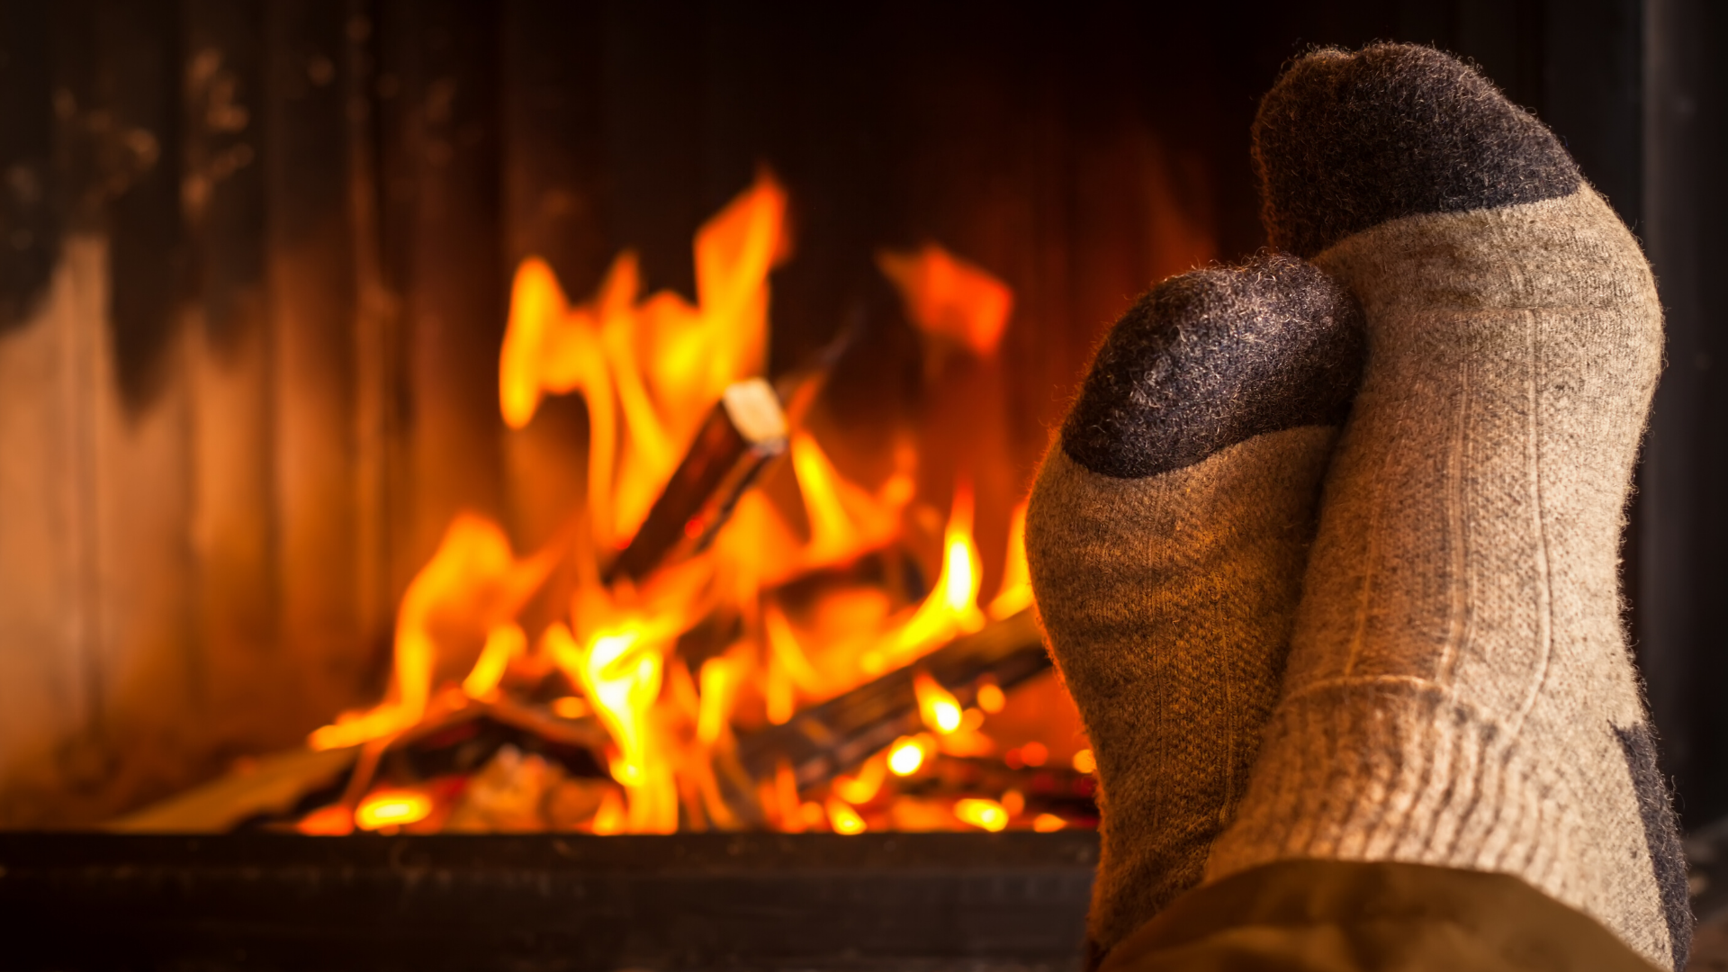 close up of feet in woolen socks, with a fireplace in the background